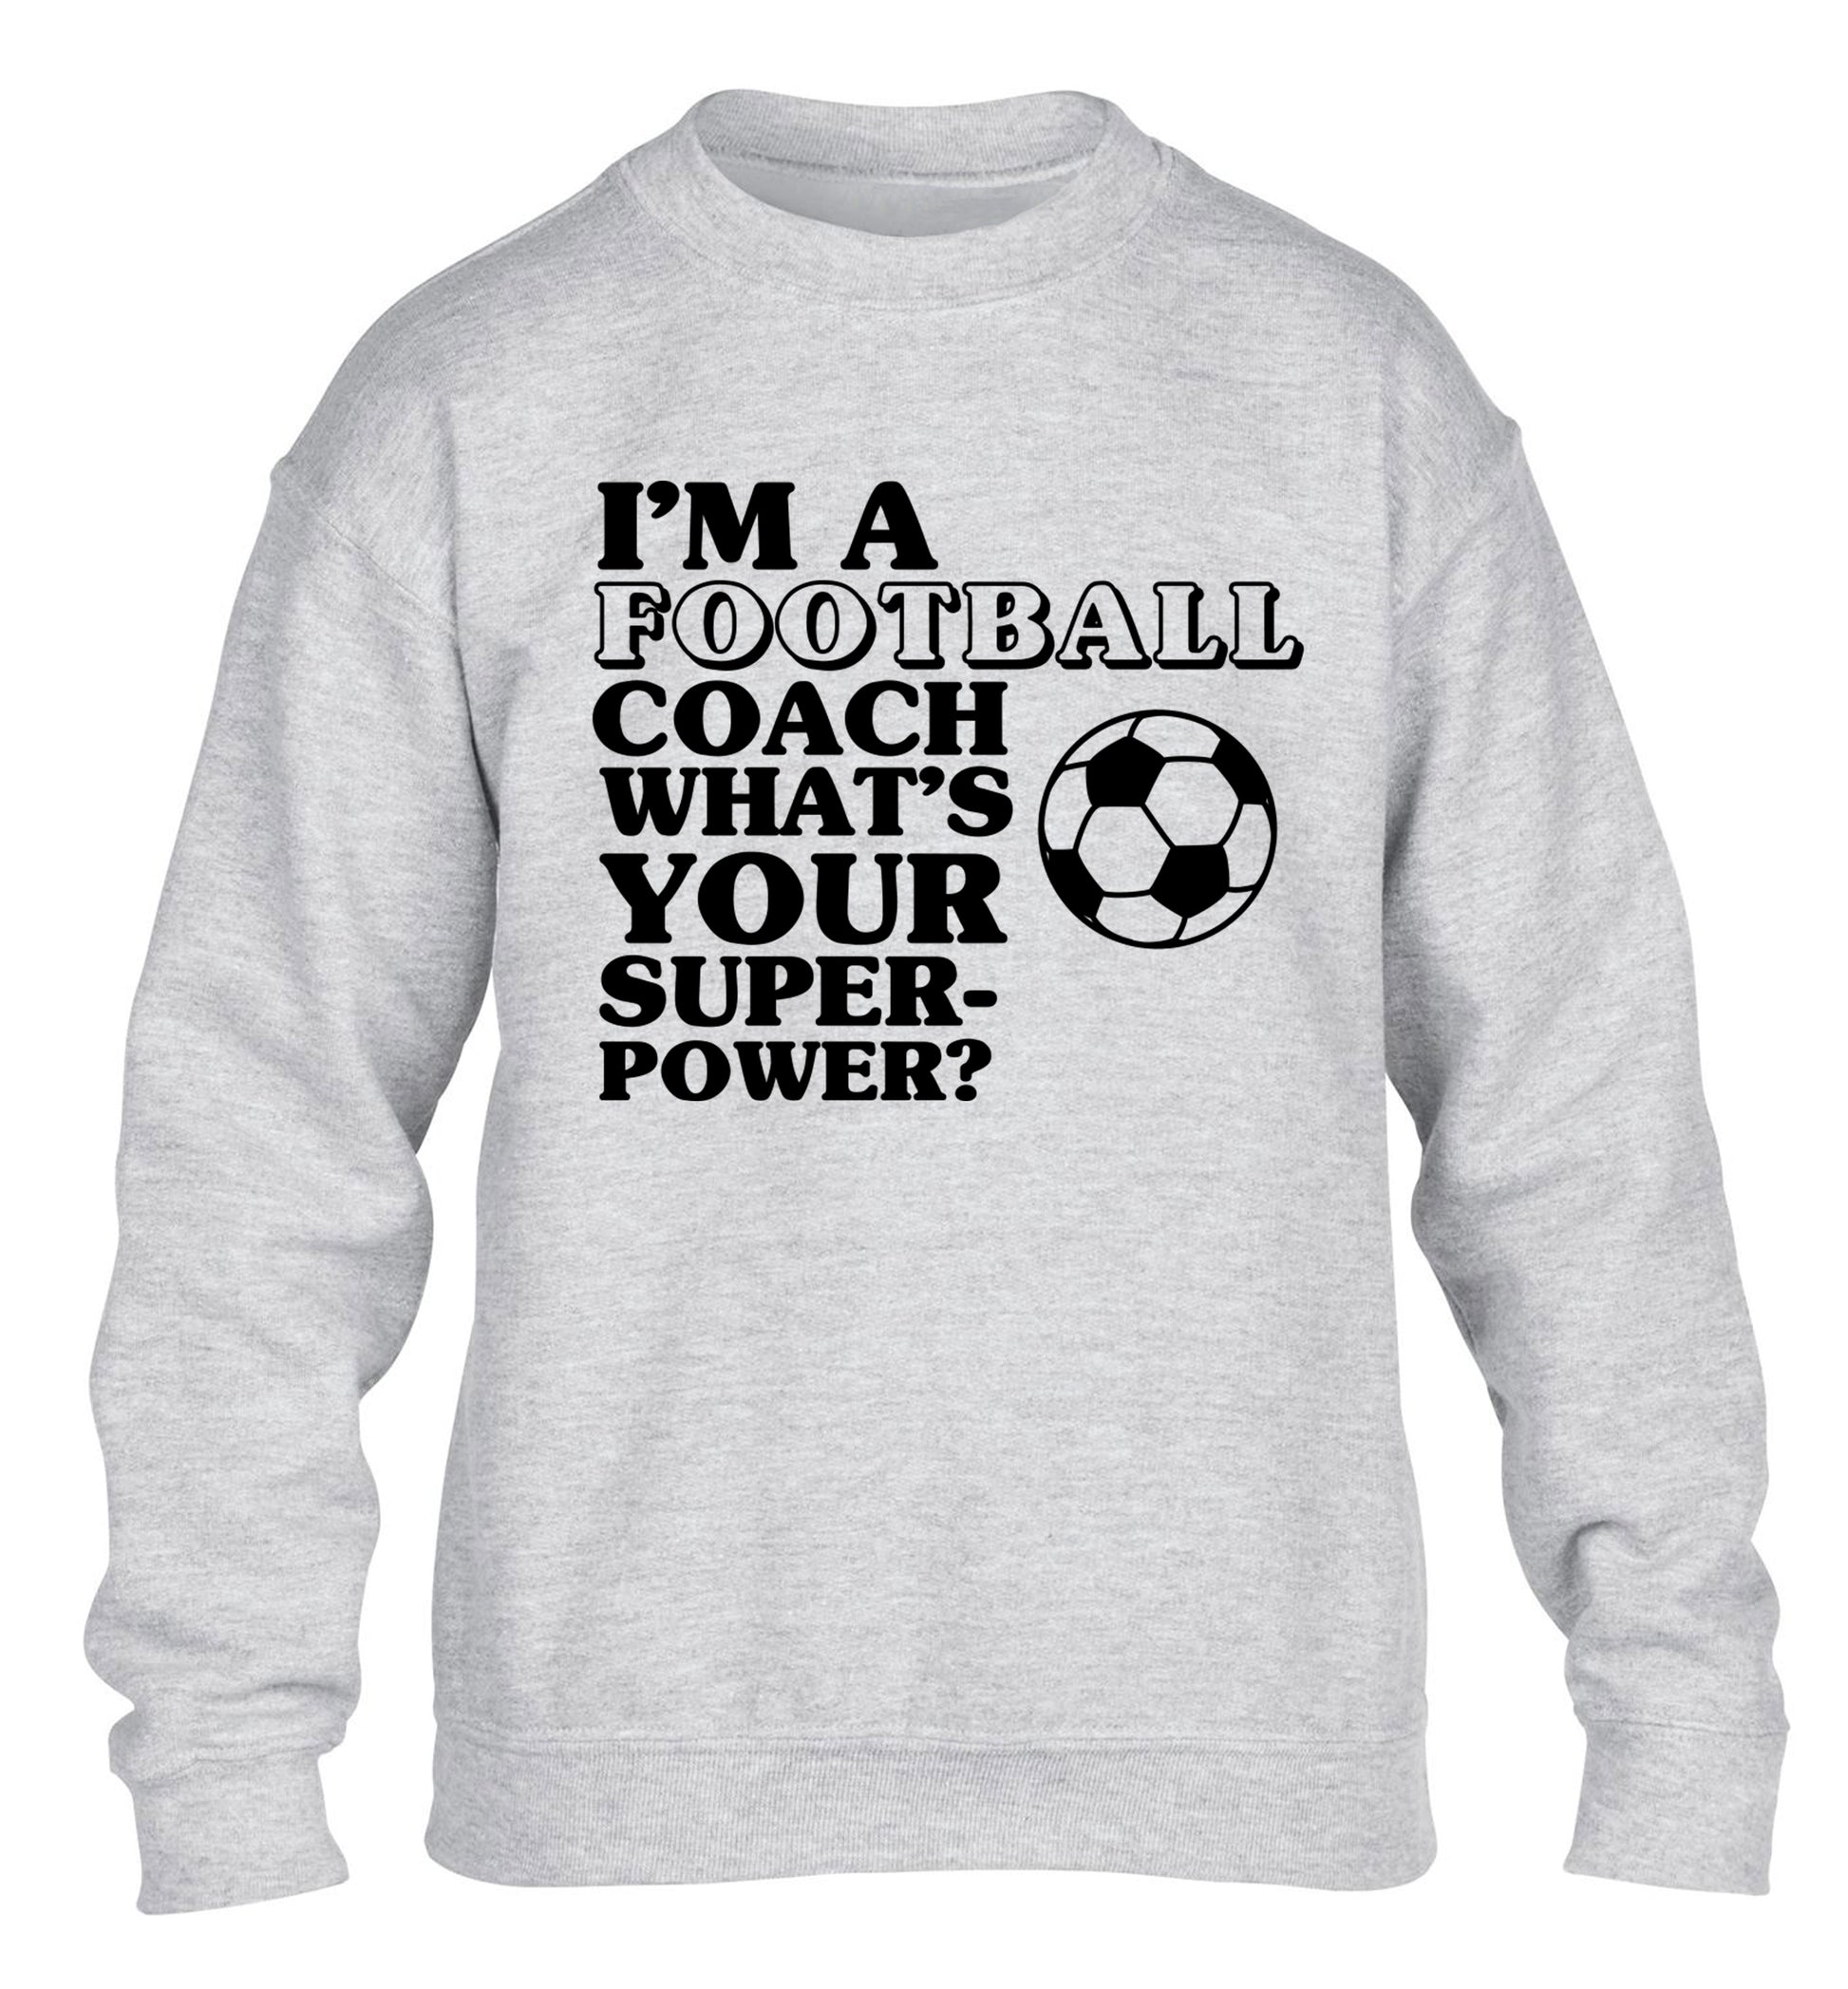 I'm a football coach what's your superpower? children's grey sweater 12-14 Years